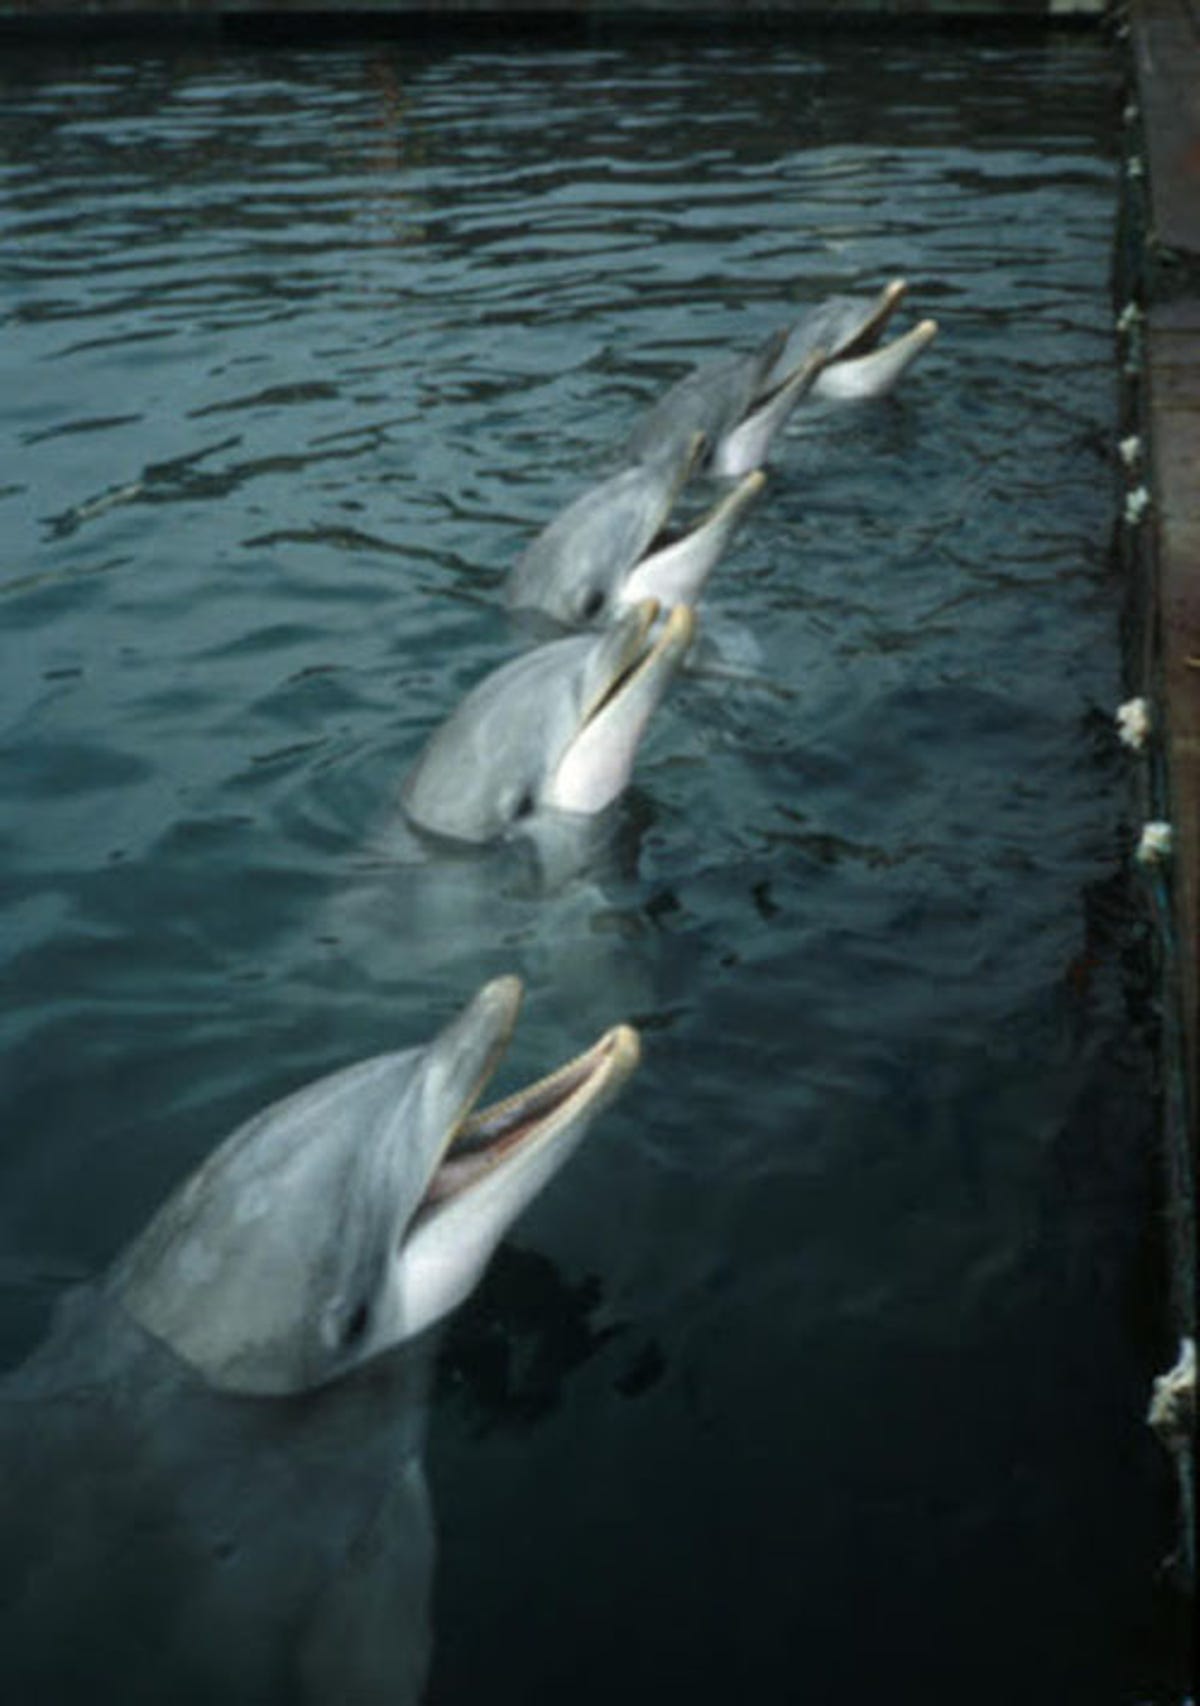 cnet-military-animals-dolphins.jpg